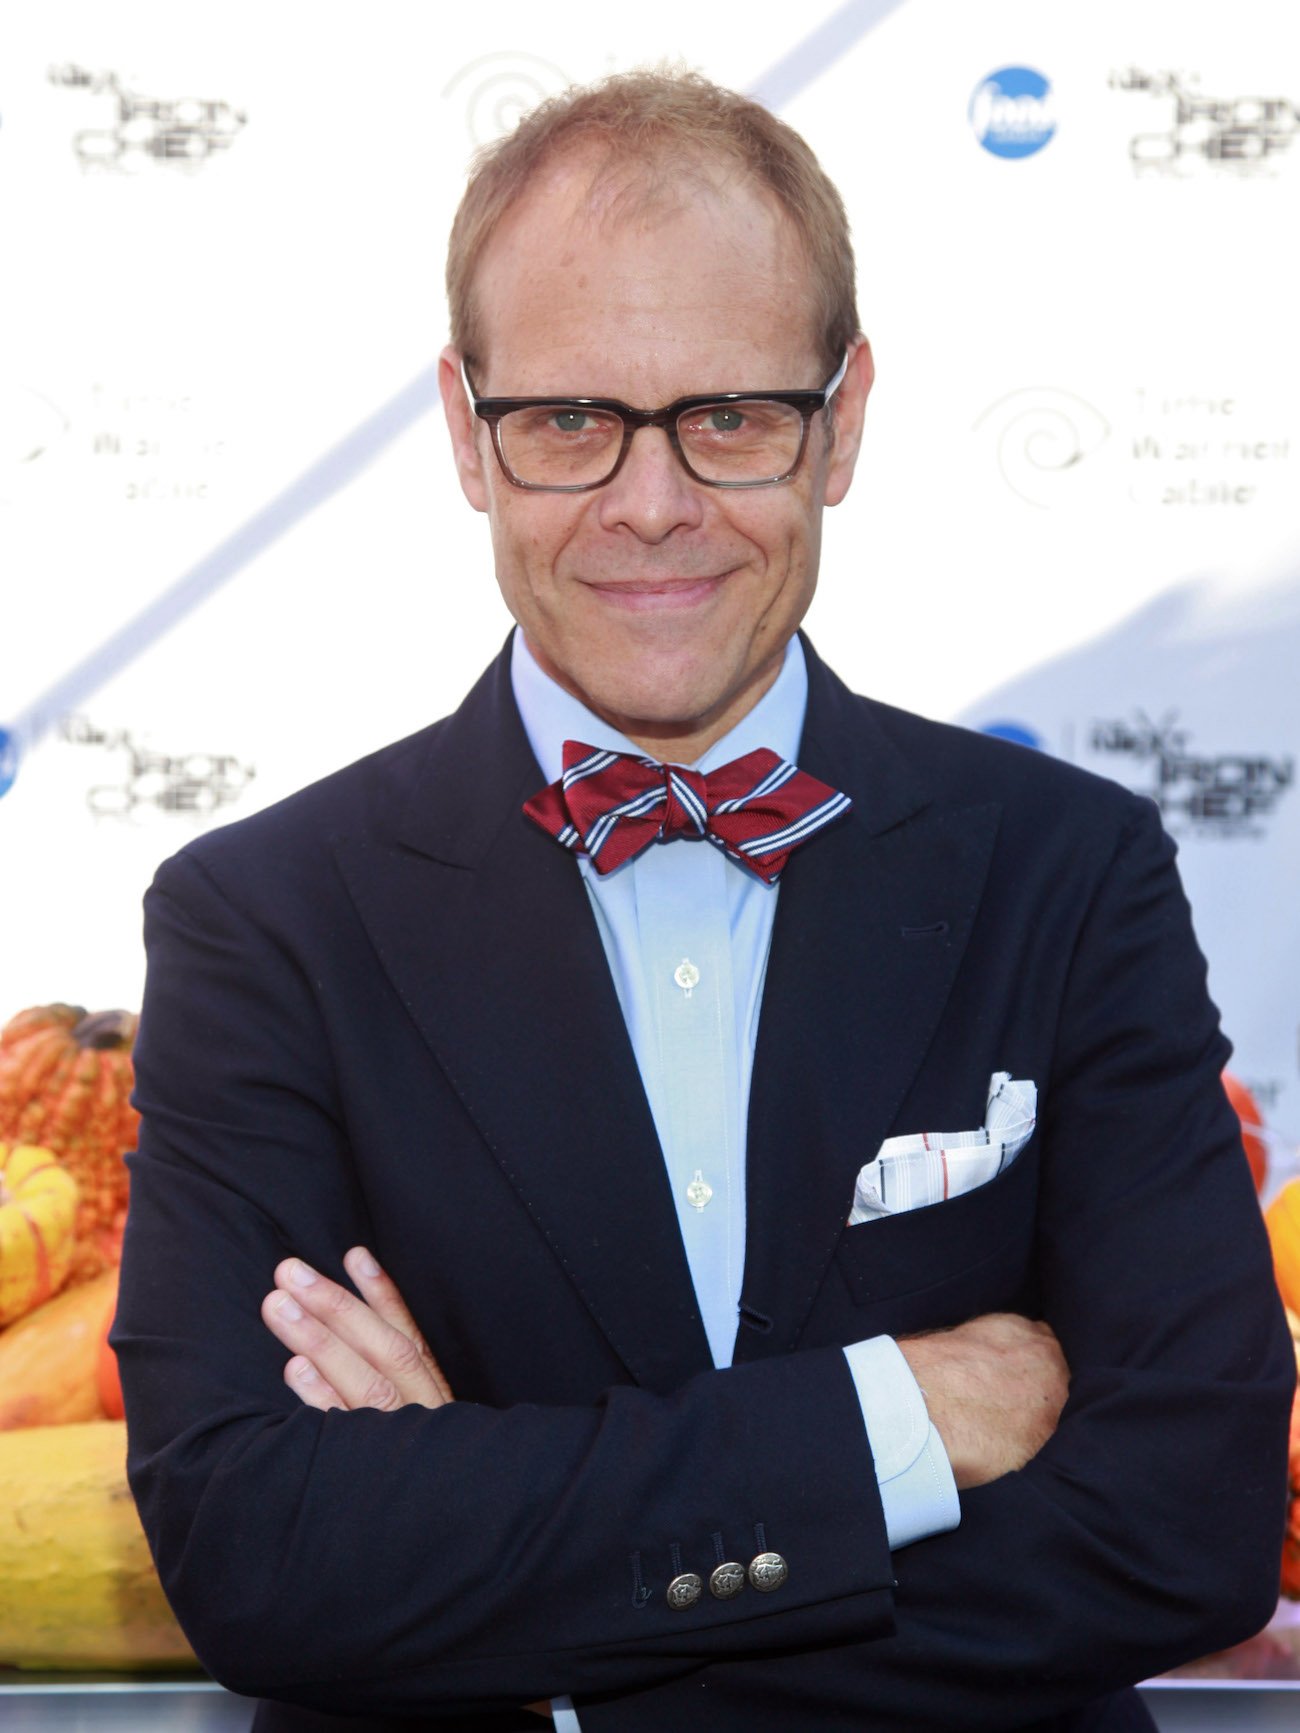 Alton Brown smirks as he stands with his arms folded wearing a blazer and bow tie